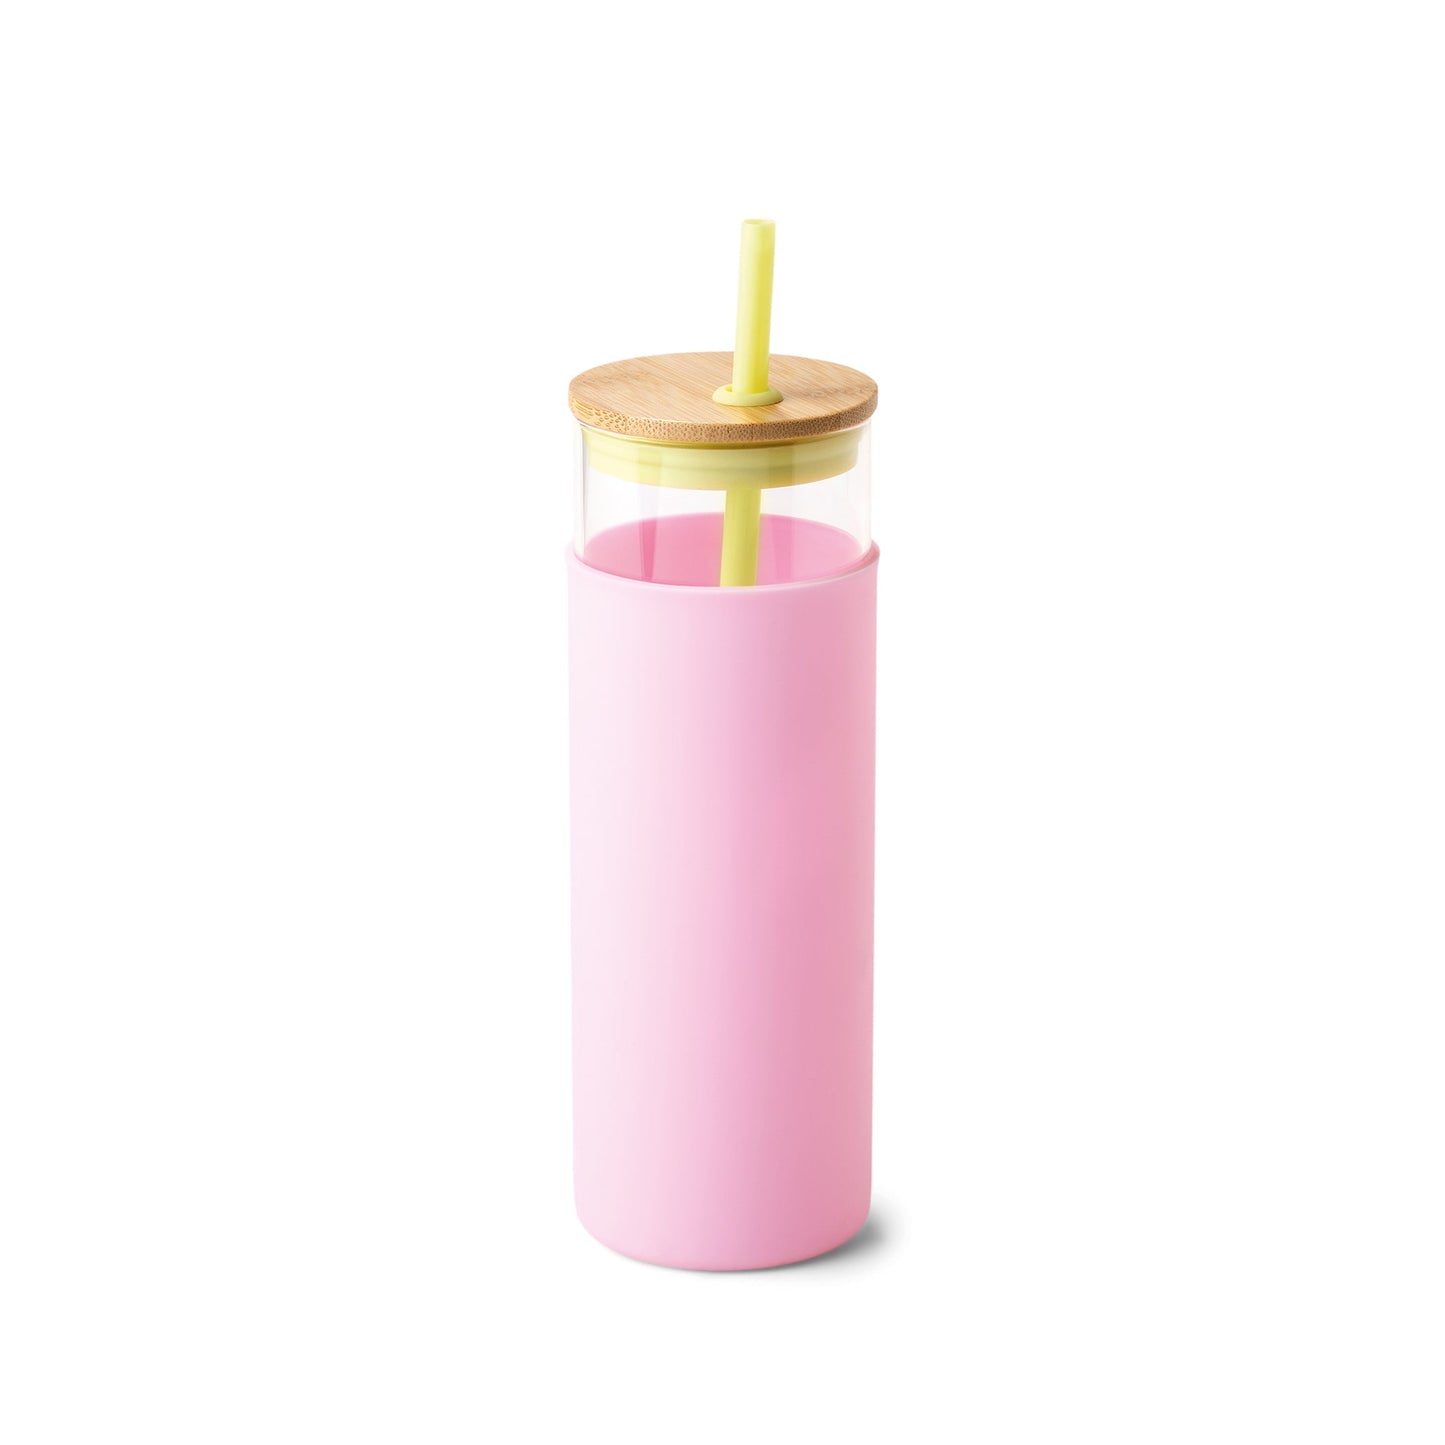 TUMBLER WITH STRAW - CITRON/PINK